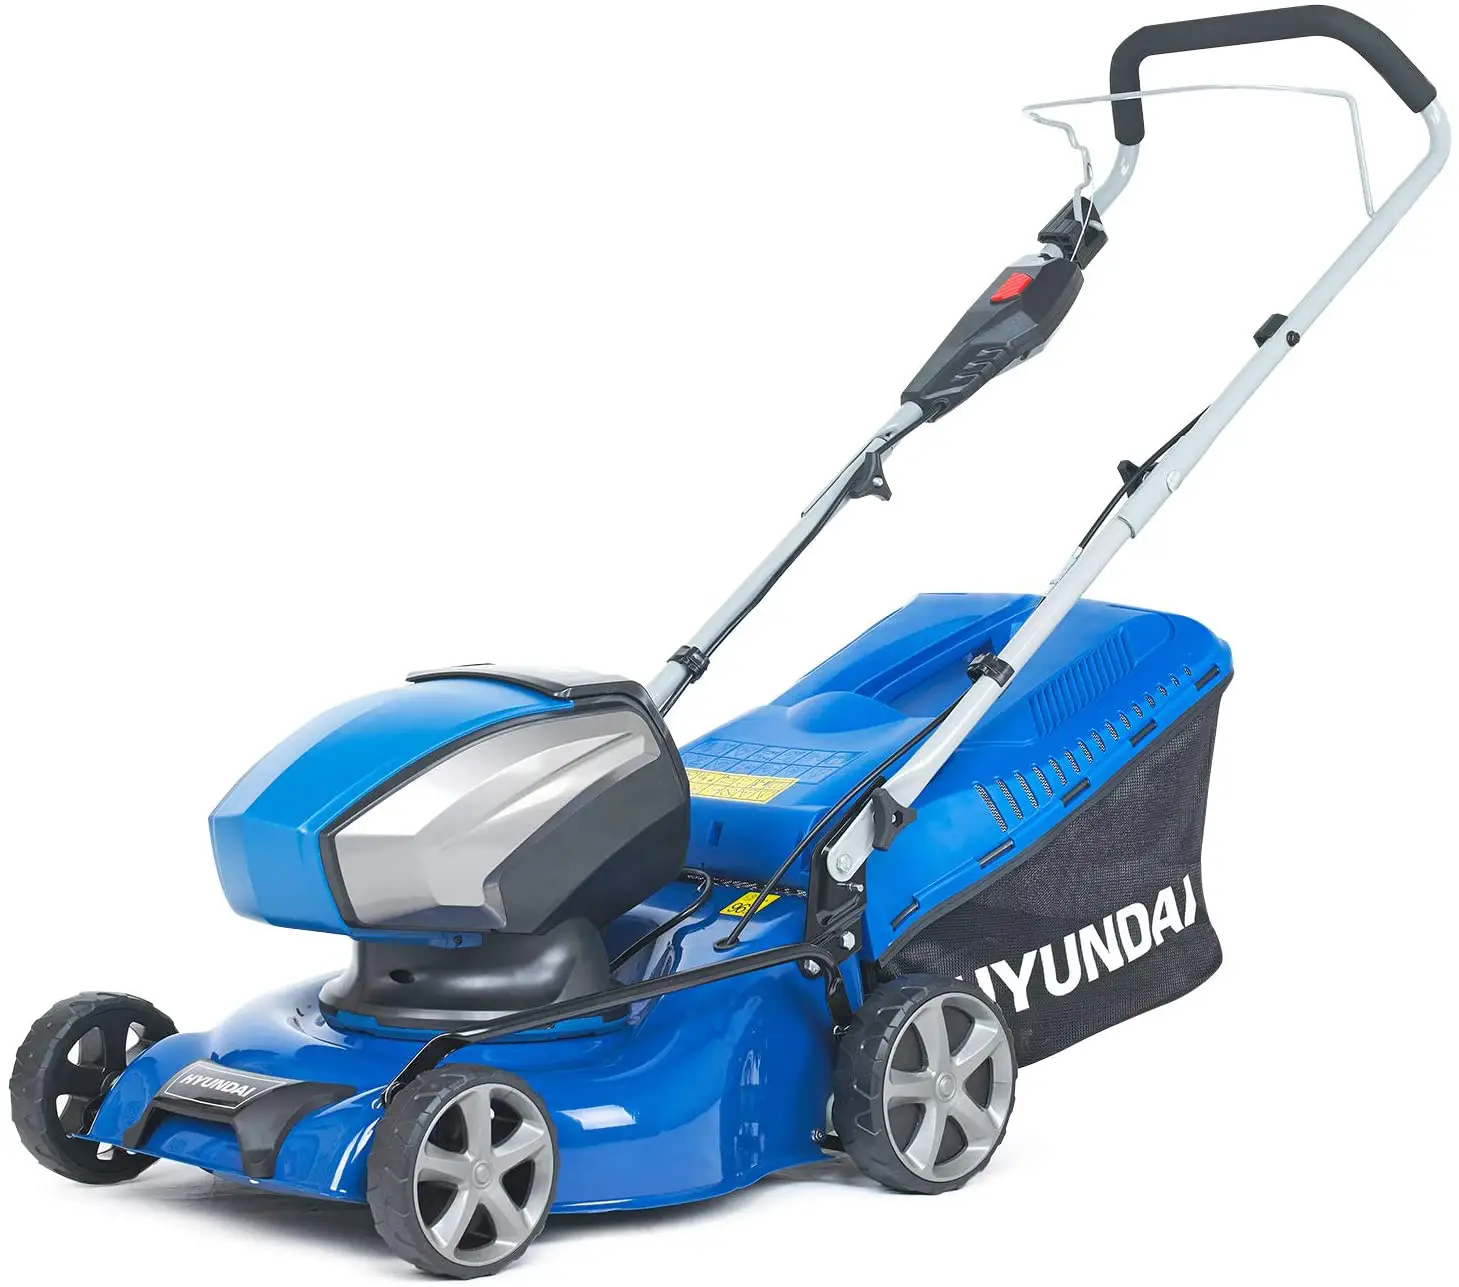 Best Cordless Electric Lawn Mower of 2021